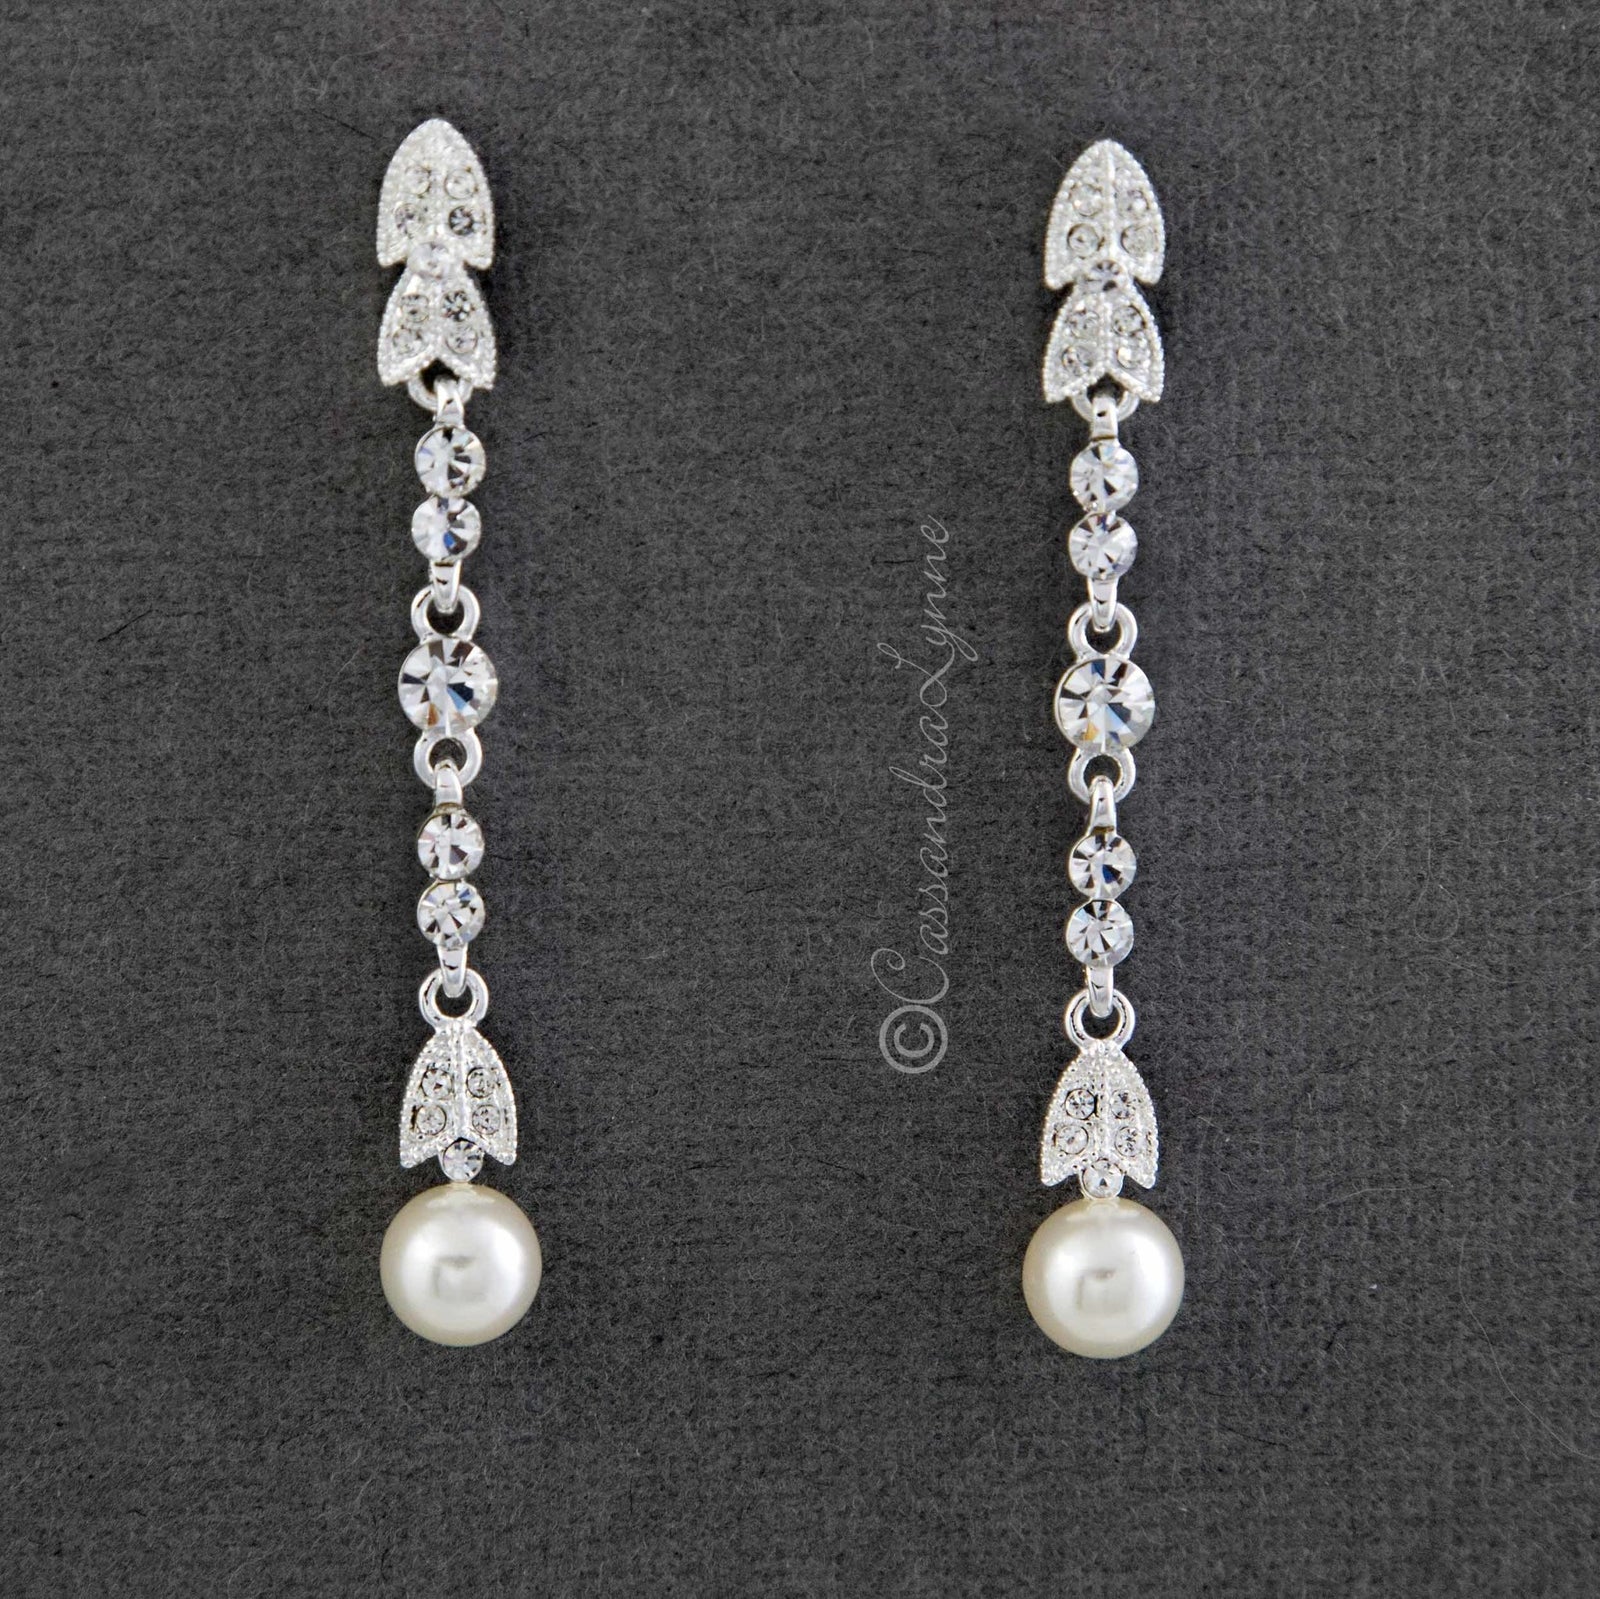 Crystal and Ivory Pearl Earrings - Cassandra Lynne